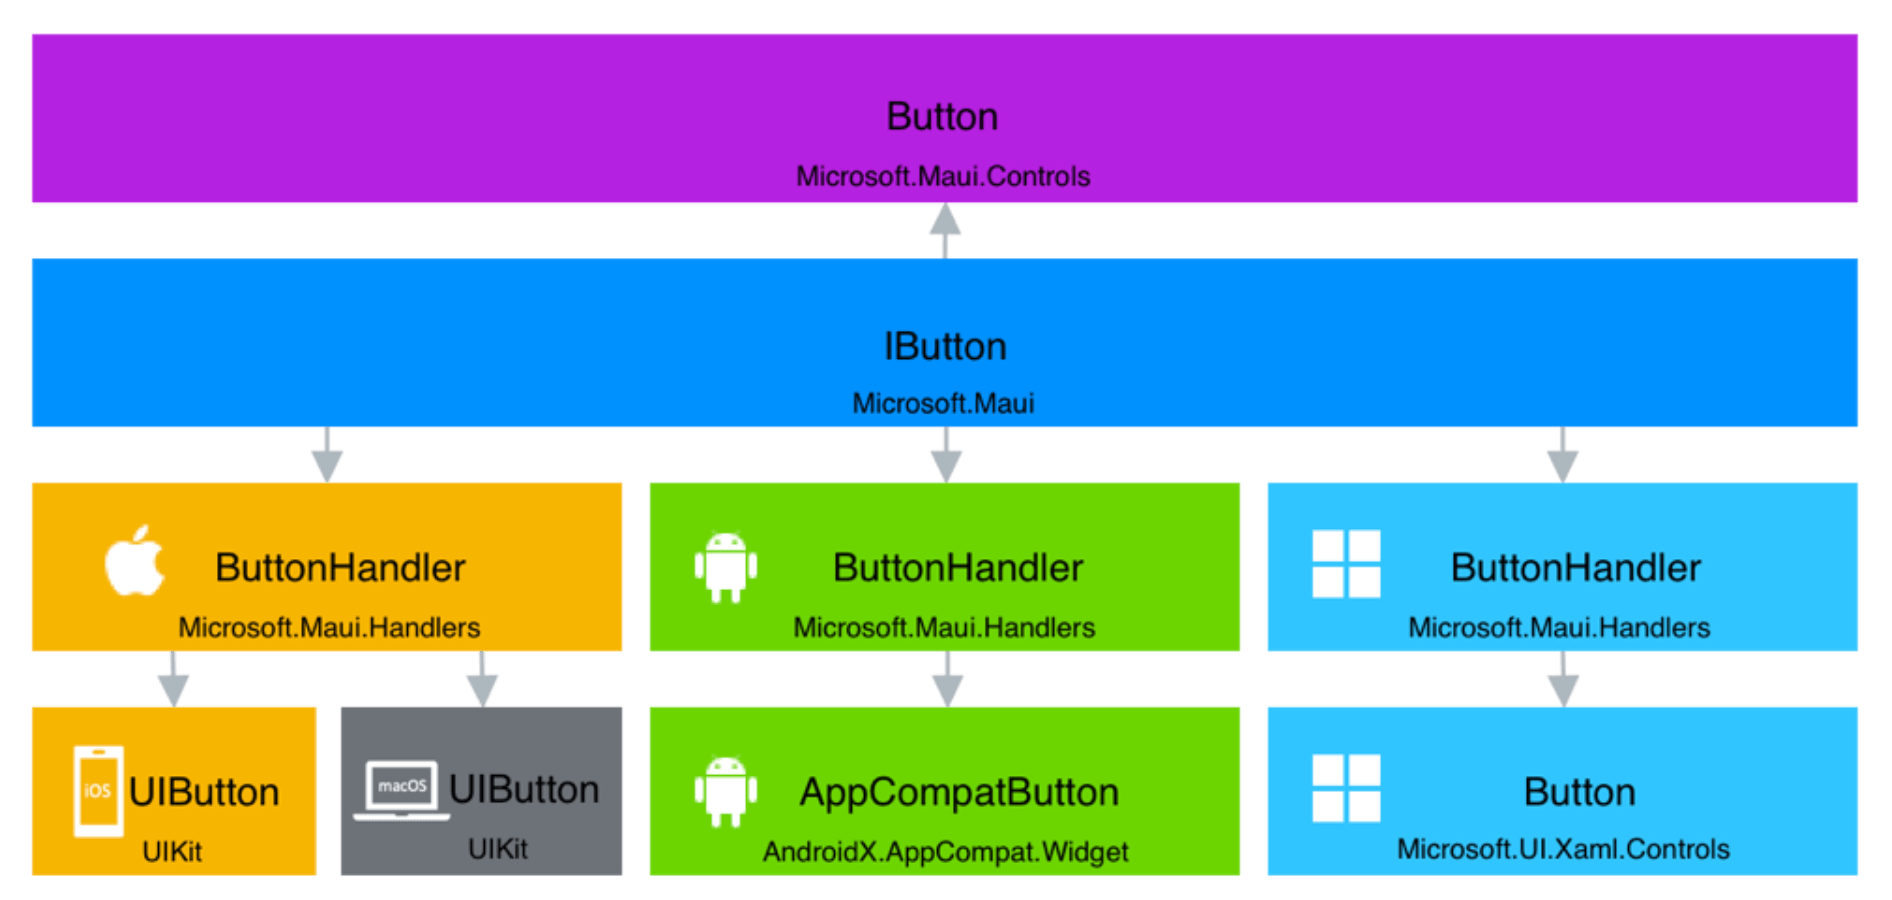 MauiArchitecture - tree diagram showing how Button (Microsoft.Maui.Controls) > IButton (Microsoft.Maui) breaks into three handlers. For Apple, ButtonHandler (Microsoft.Maui.Handlers) breaks into two: UIButton (UIKit) for iOS and UIButton (UIKit) for macOS. For Android, ButtonHandler (Microsoft.Maui.Handlers) goes into AppCompatButton (AndroidX.AppCompat.Widget). For Windows, Button Handler (Microsoft.Maui.Handlers) goes into Button (Microsoft.UI.Xaml.Controls).